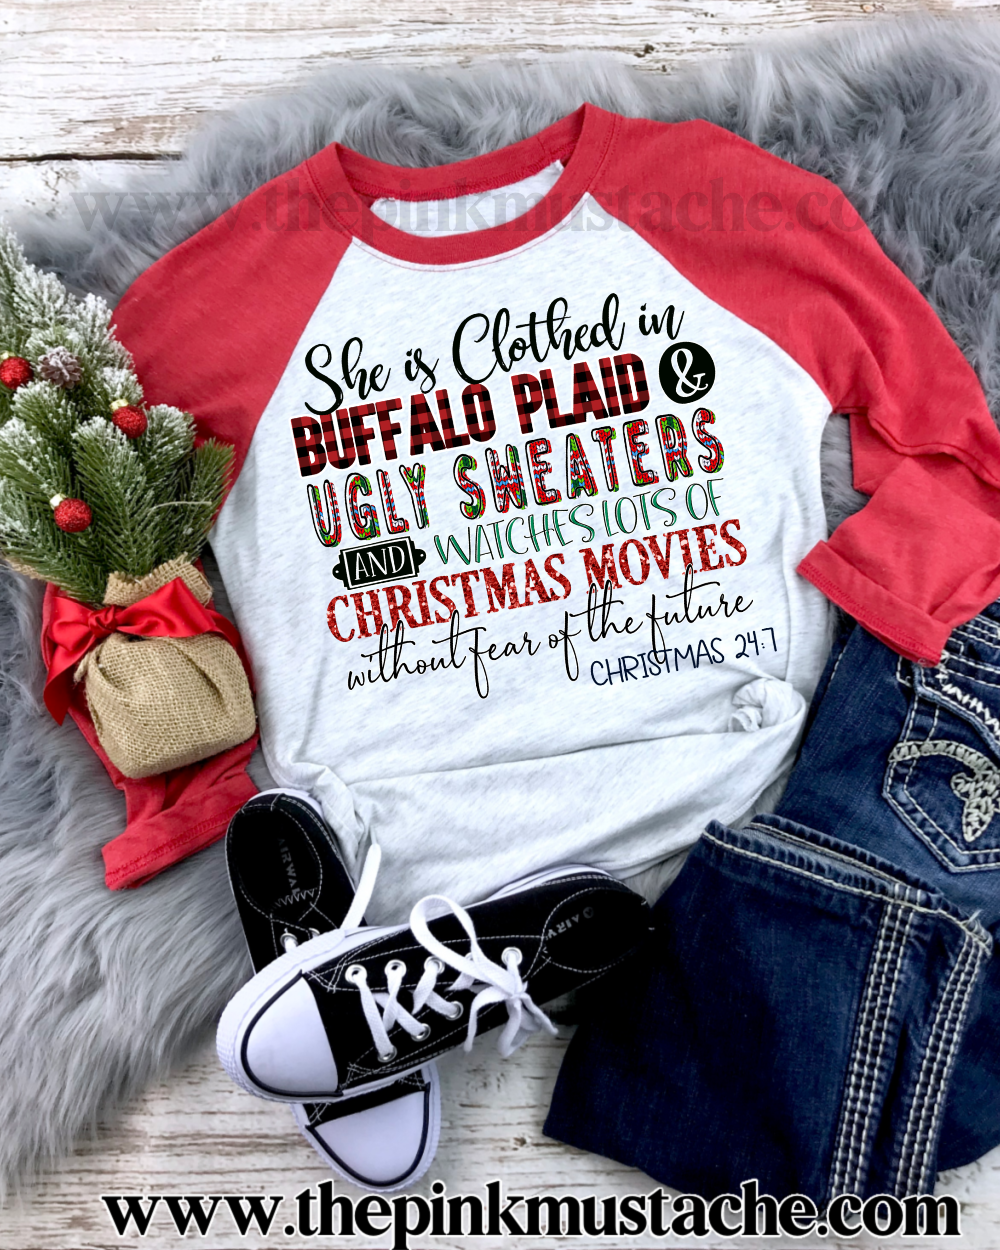 She Is Clothed In Buffalo Plaid and Ugly Sweaters And Watches Lots of Christmas Movies Without Fear of The Future- Christmas 24/7 Raglan/ Youth and Adult Sizing